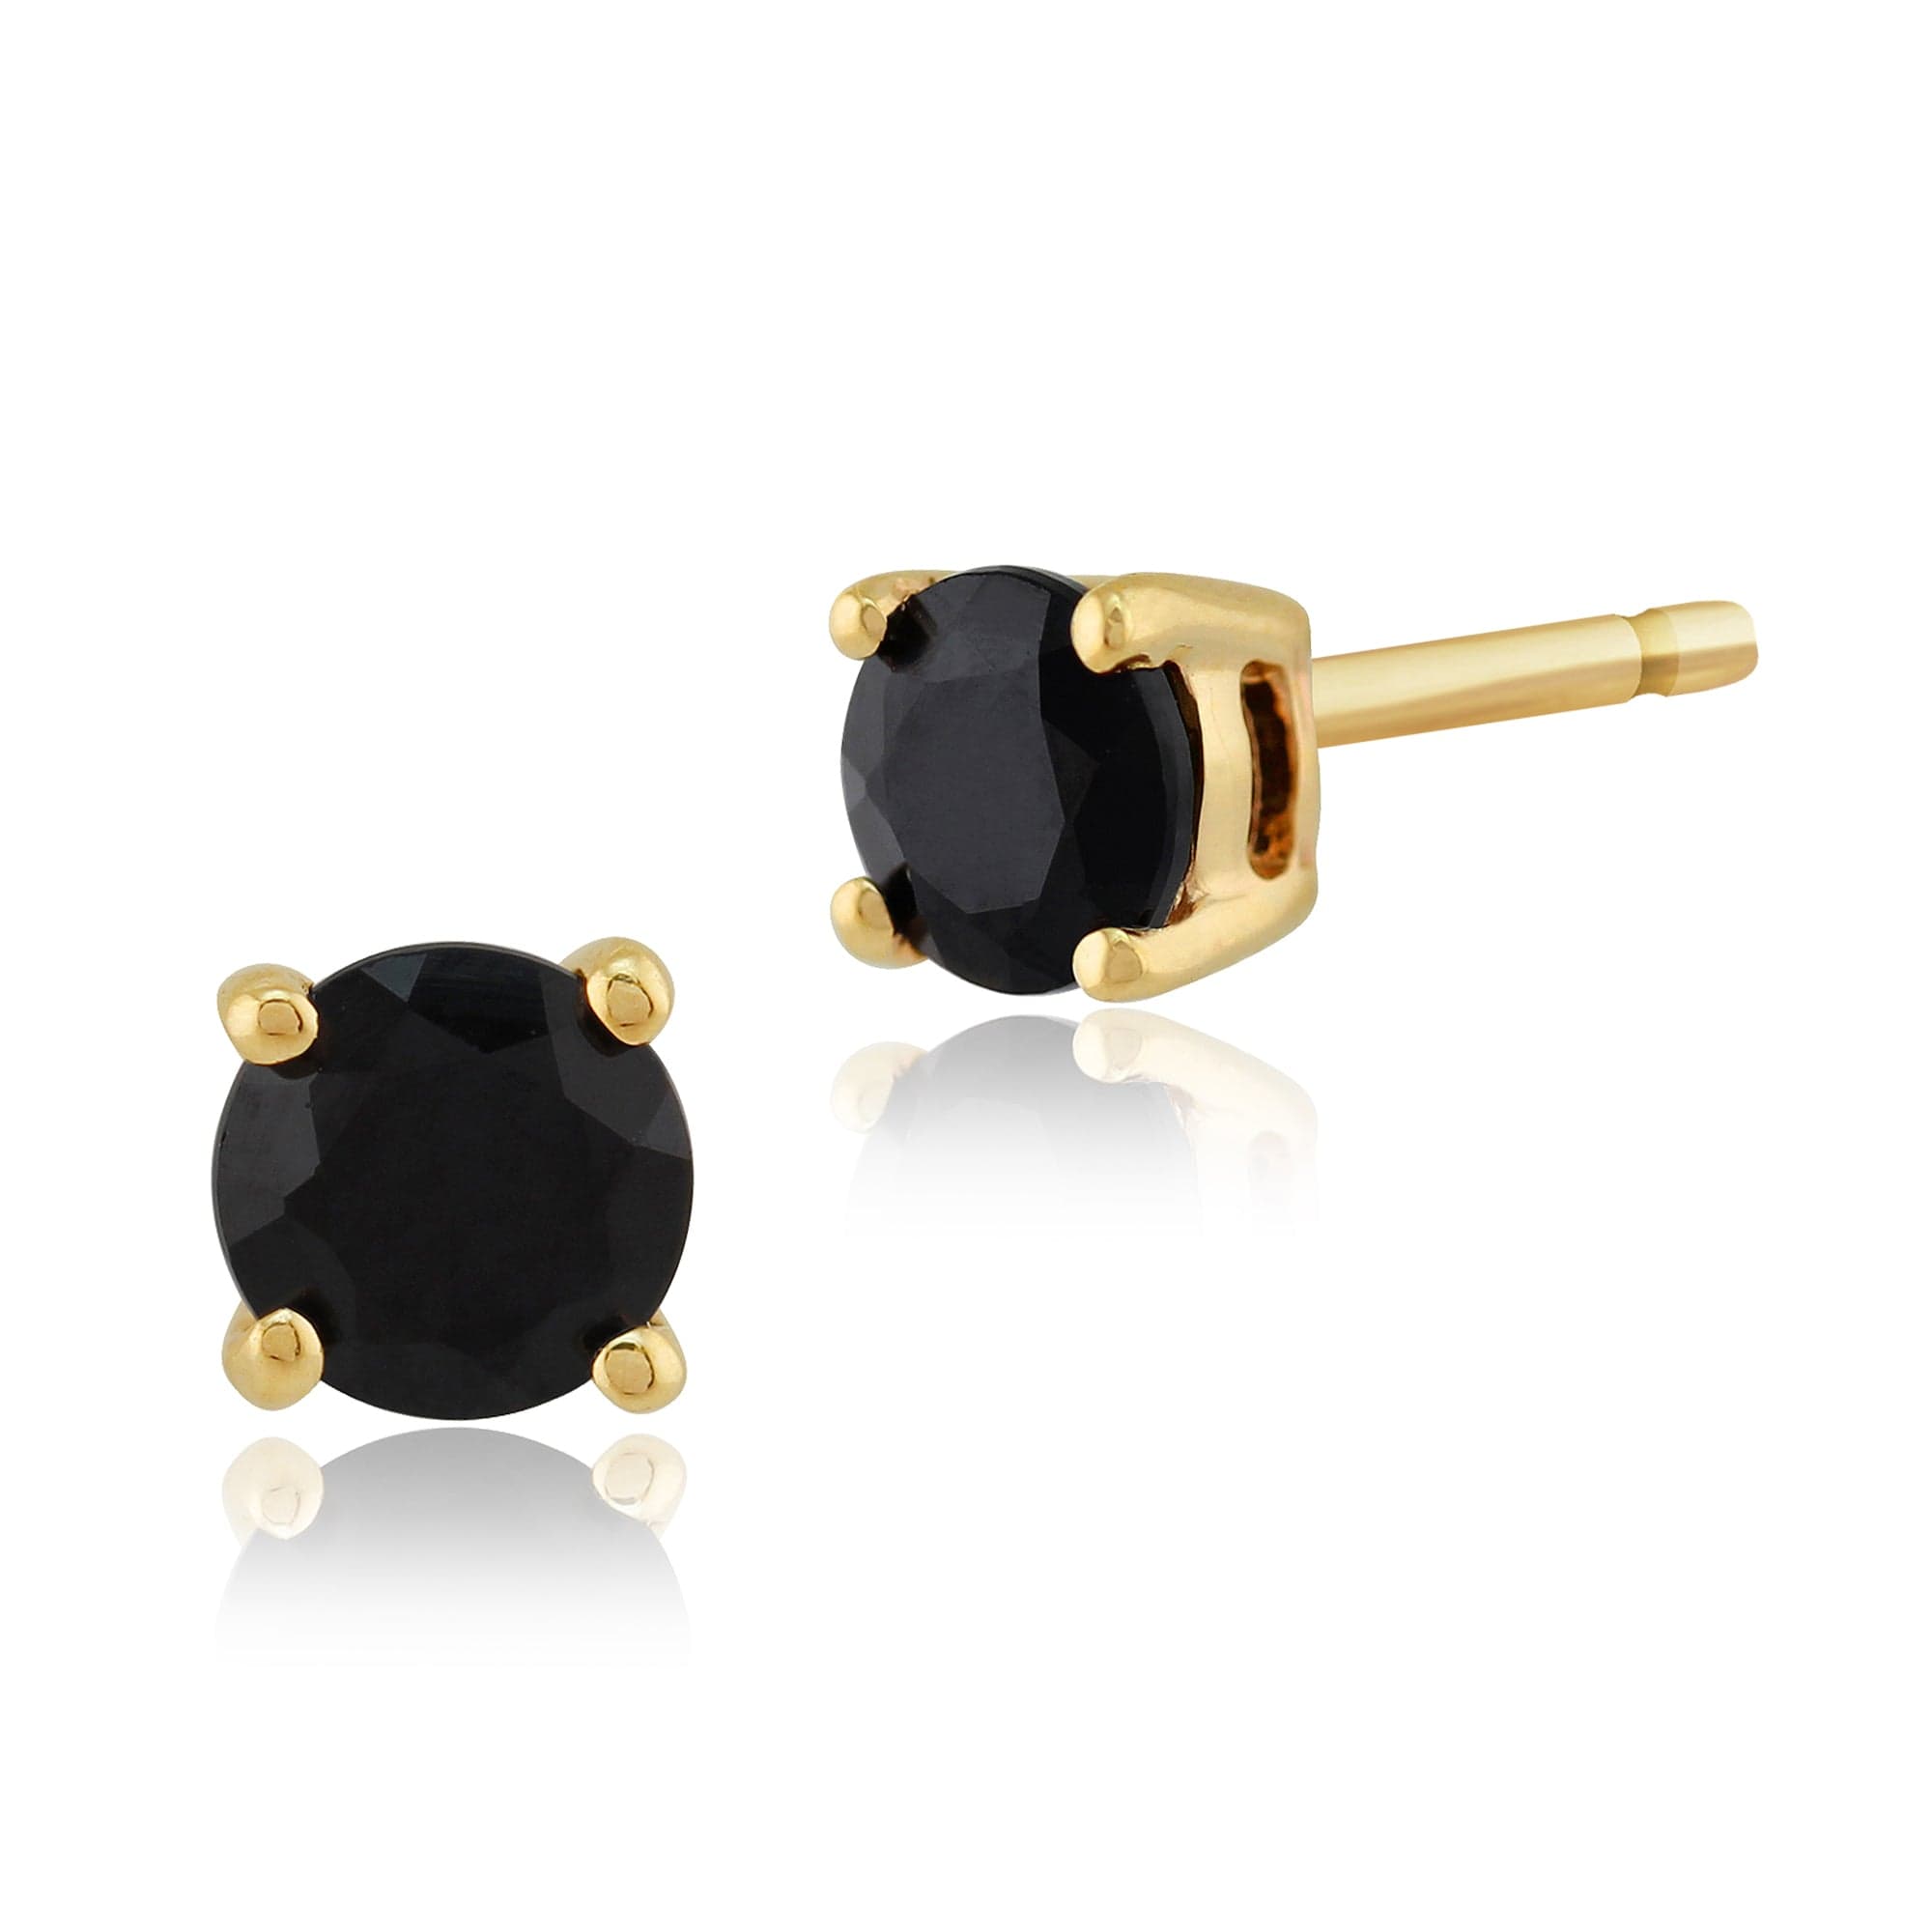 Classic Round Dark Blue Sapphire Studs with Detachable Diamond Floral Ear Jacket in 9ct Yellow Gold - Gemondo